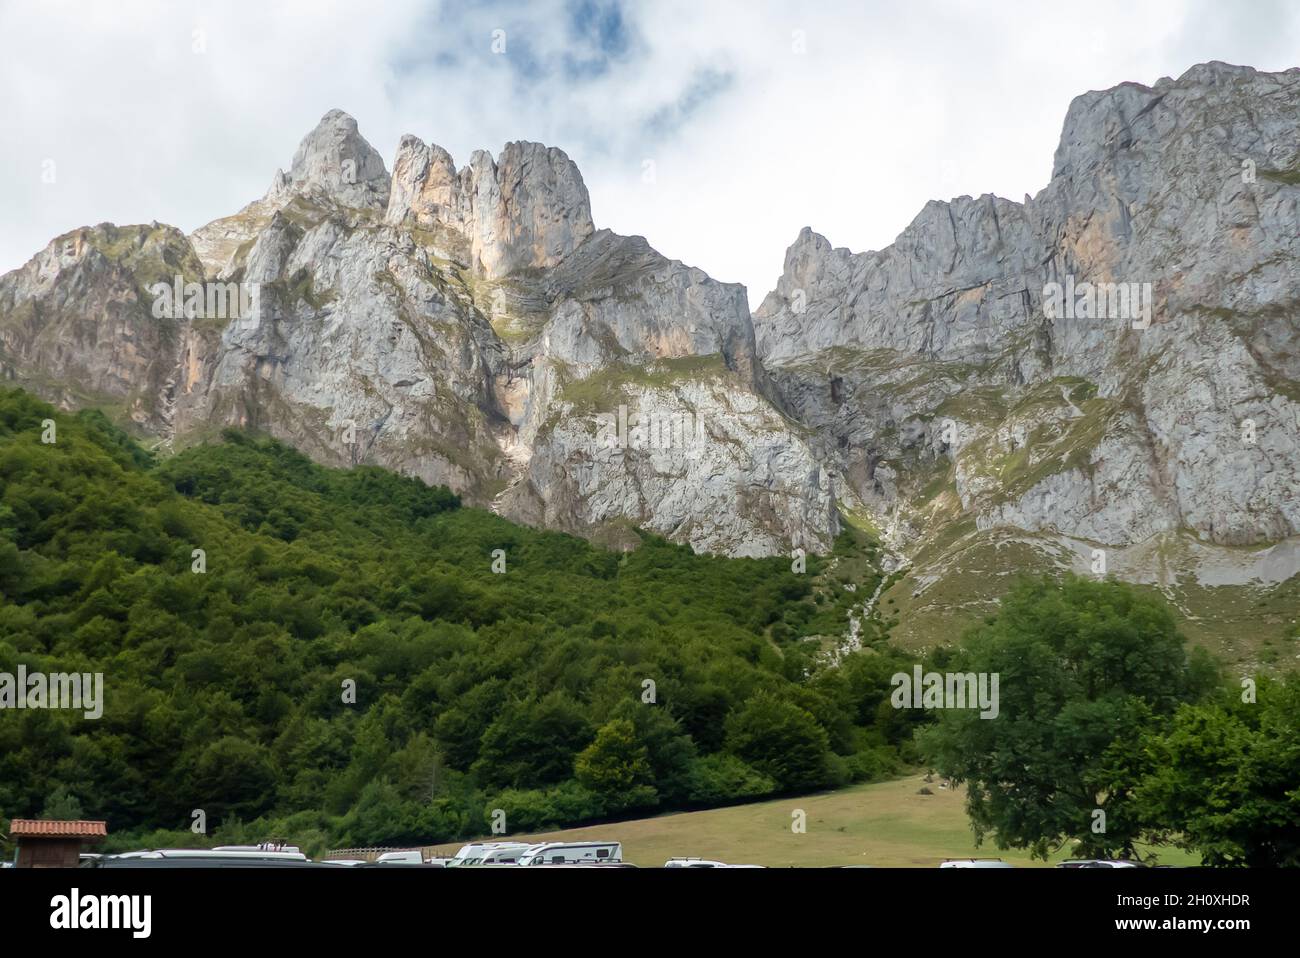 Asturias in Spain: the mountains at Fuente Dé. Stock Photo